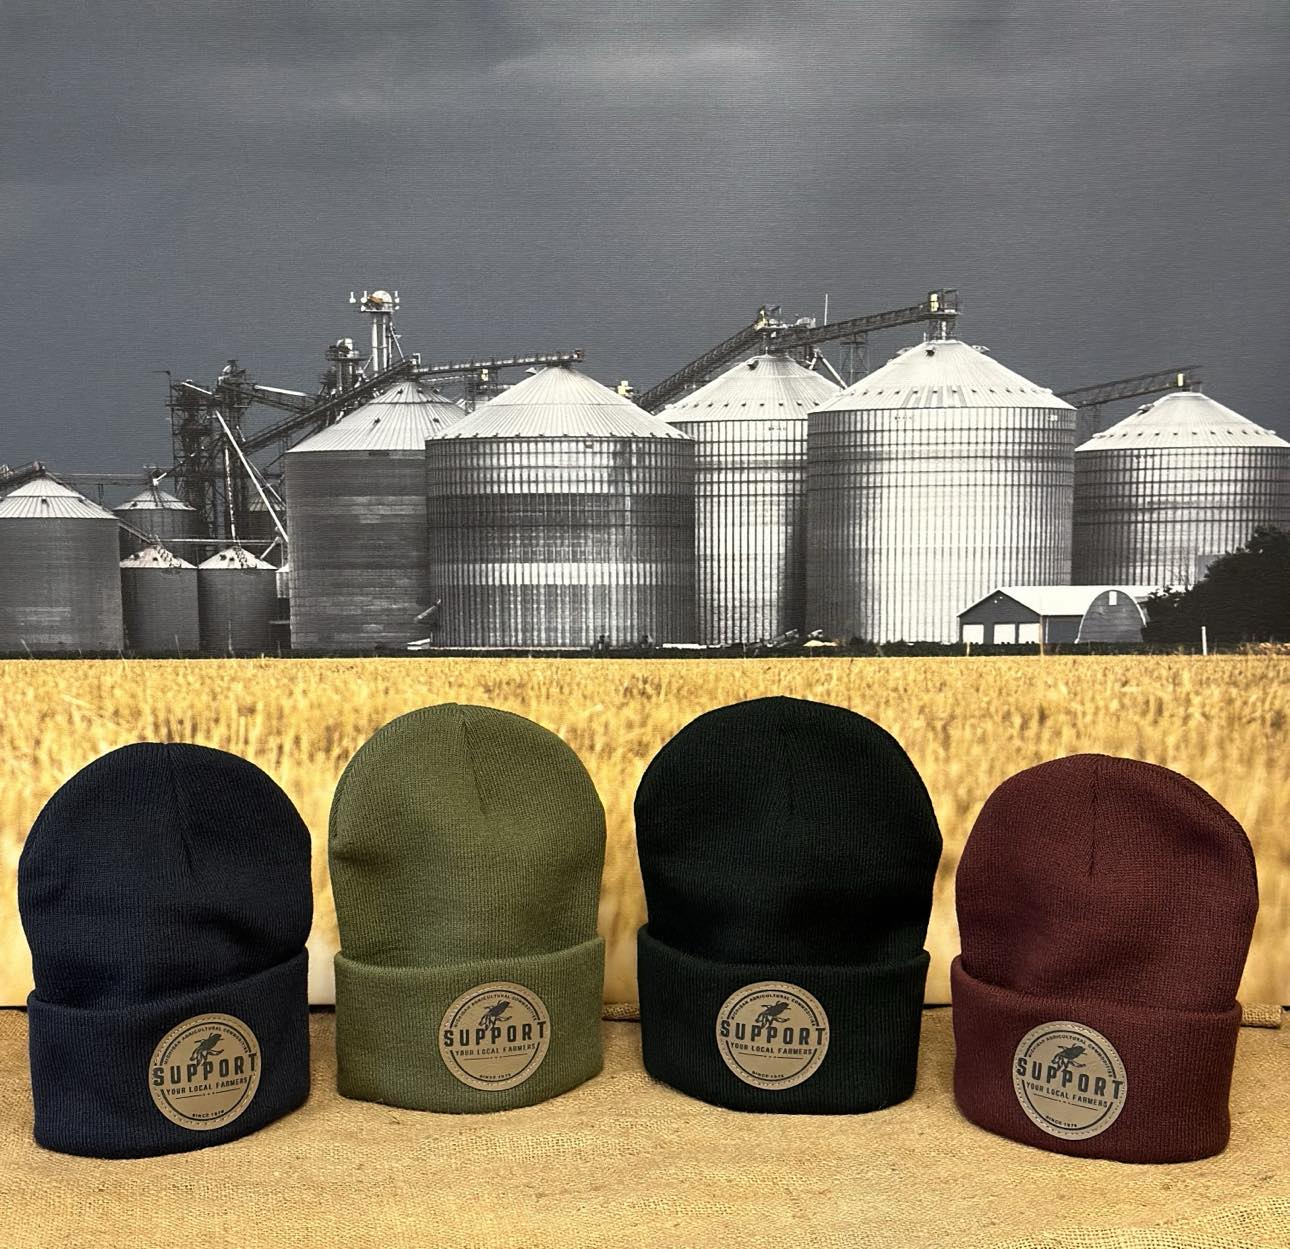 SUPPORT YOUR LOCAL FARMER PATCH KNIT HAT - NAVY